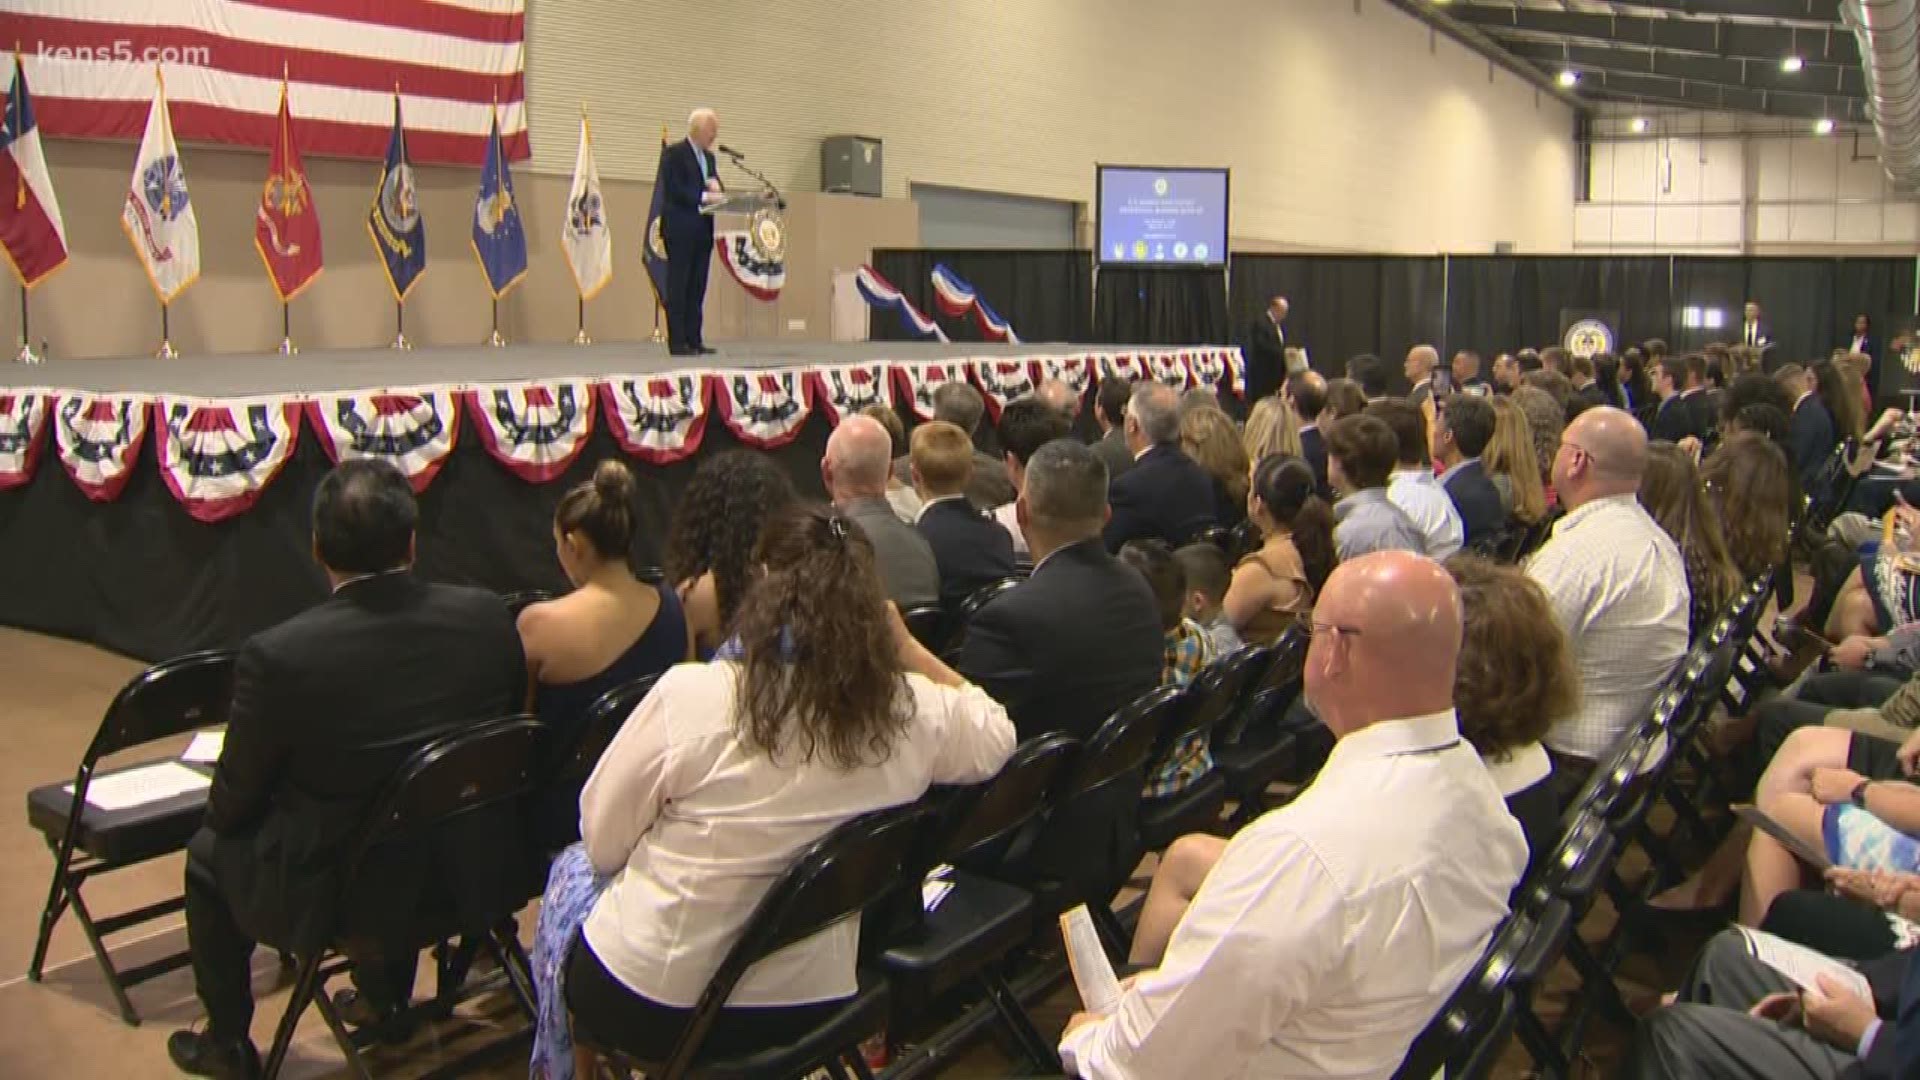 As people across the nation pause to honor lives lost in service, a special send-off honored the next generation of military leaders for their commitment to step up and serve.